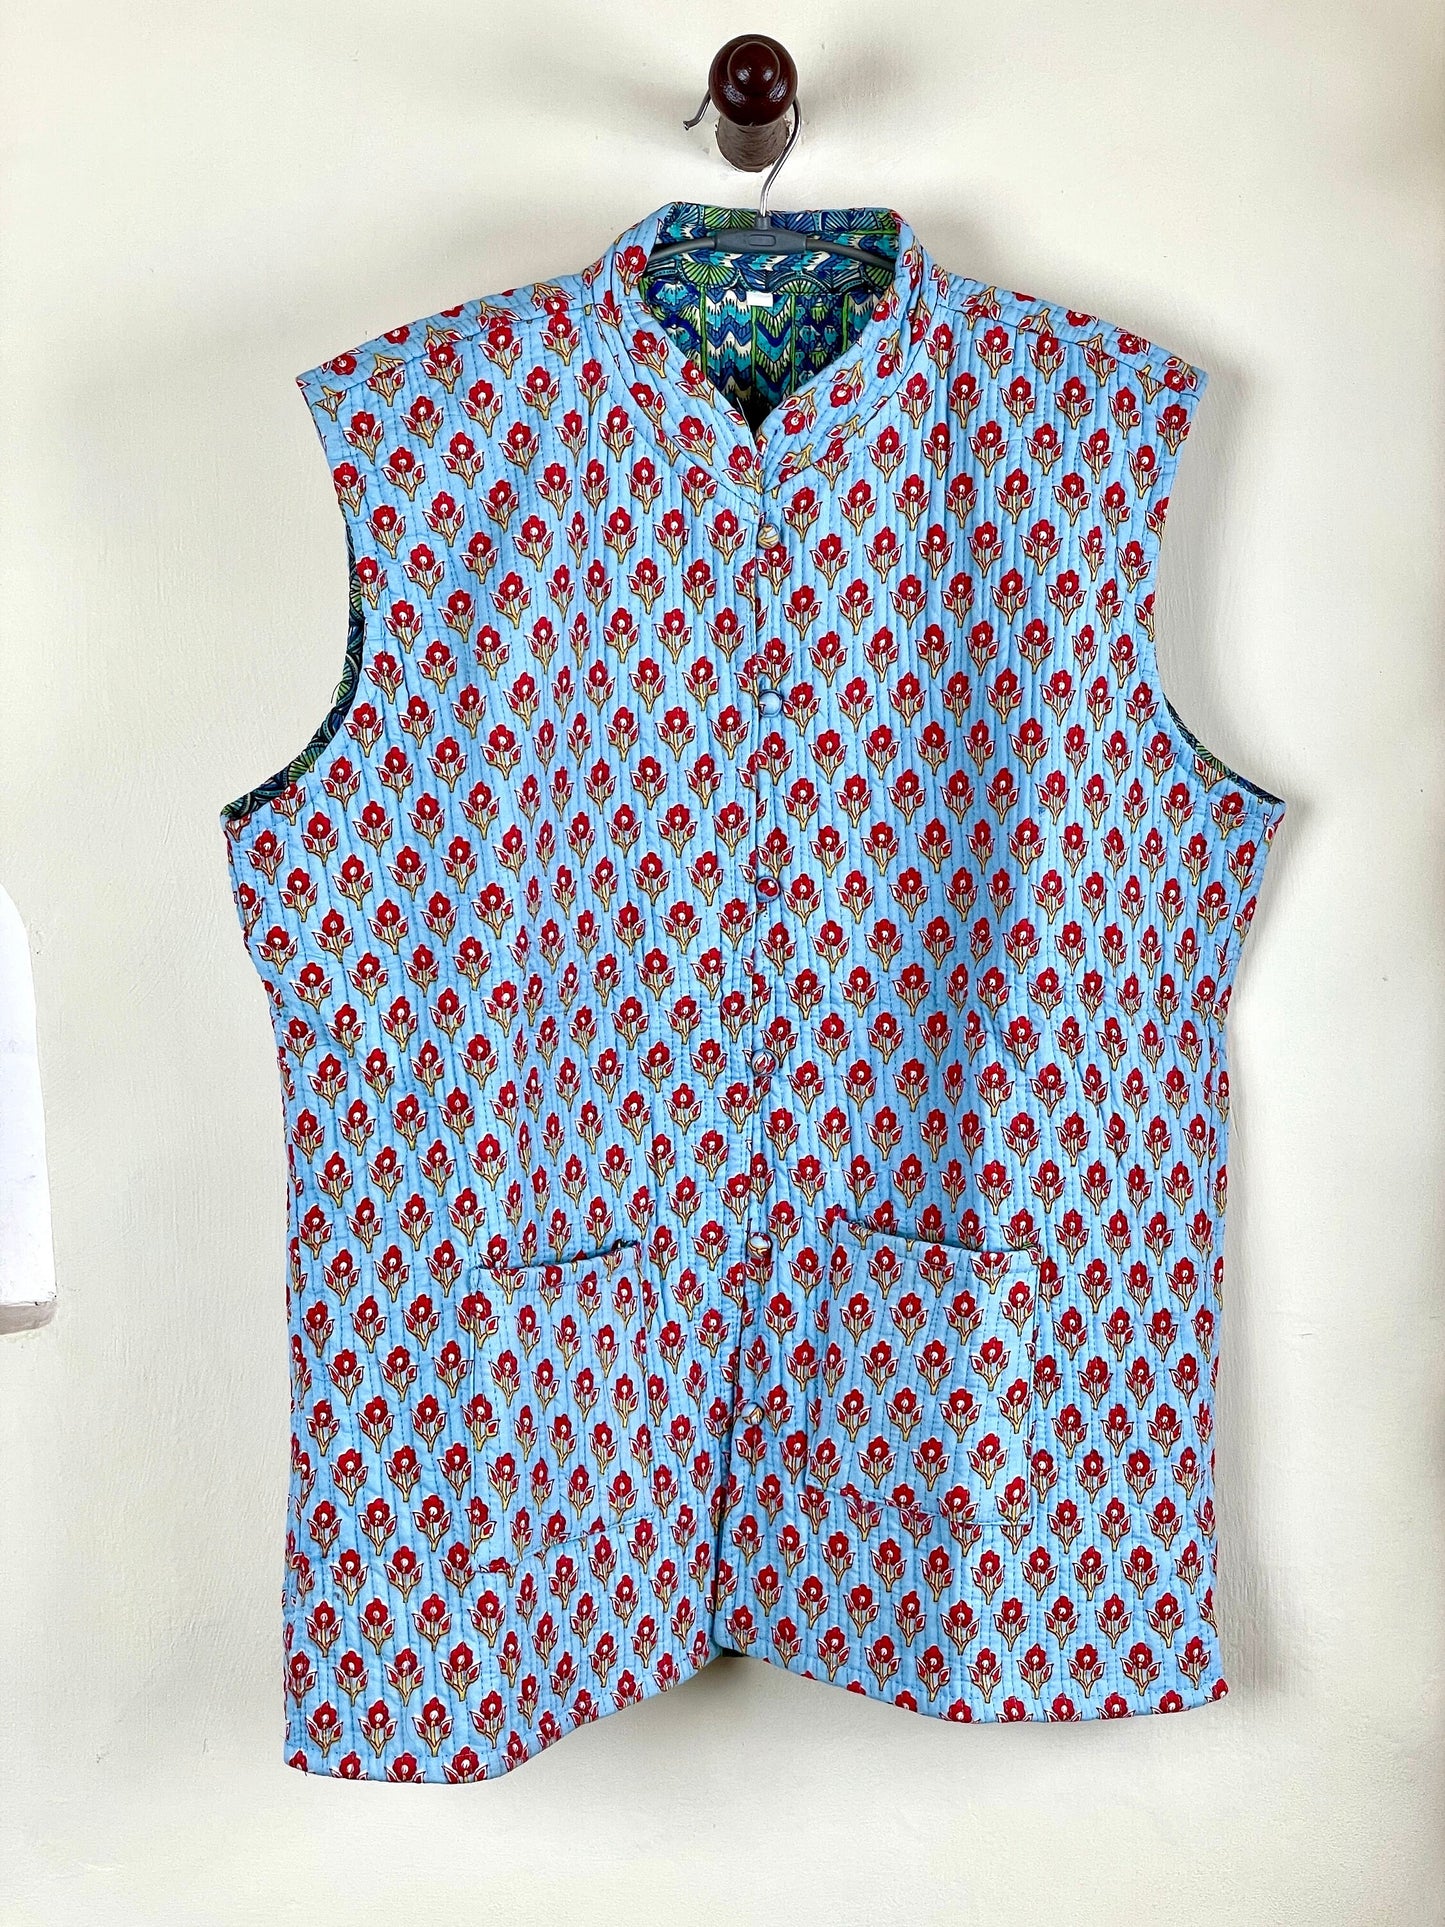 Indian Handmade Quilted Cotton Fabric Jacket Stylish Blue & Red Floral Women's Sleeveless Vest, Reversible Waistcoat for Her